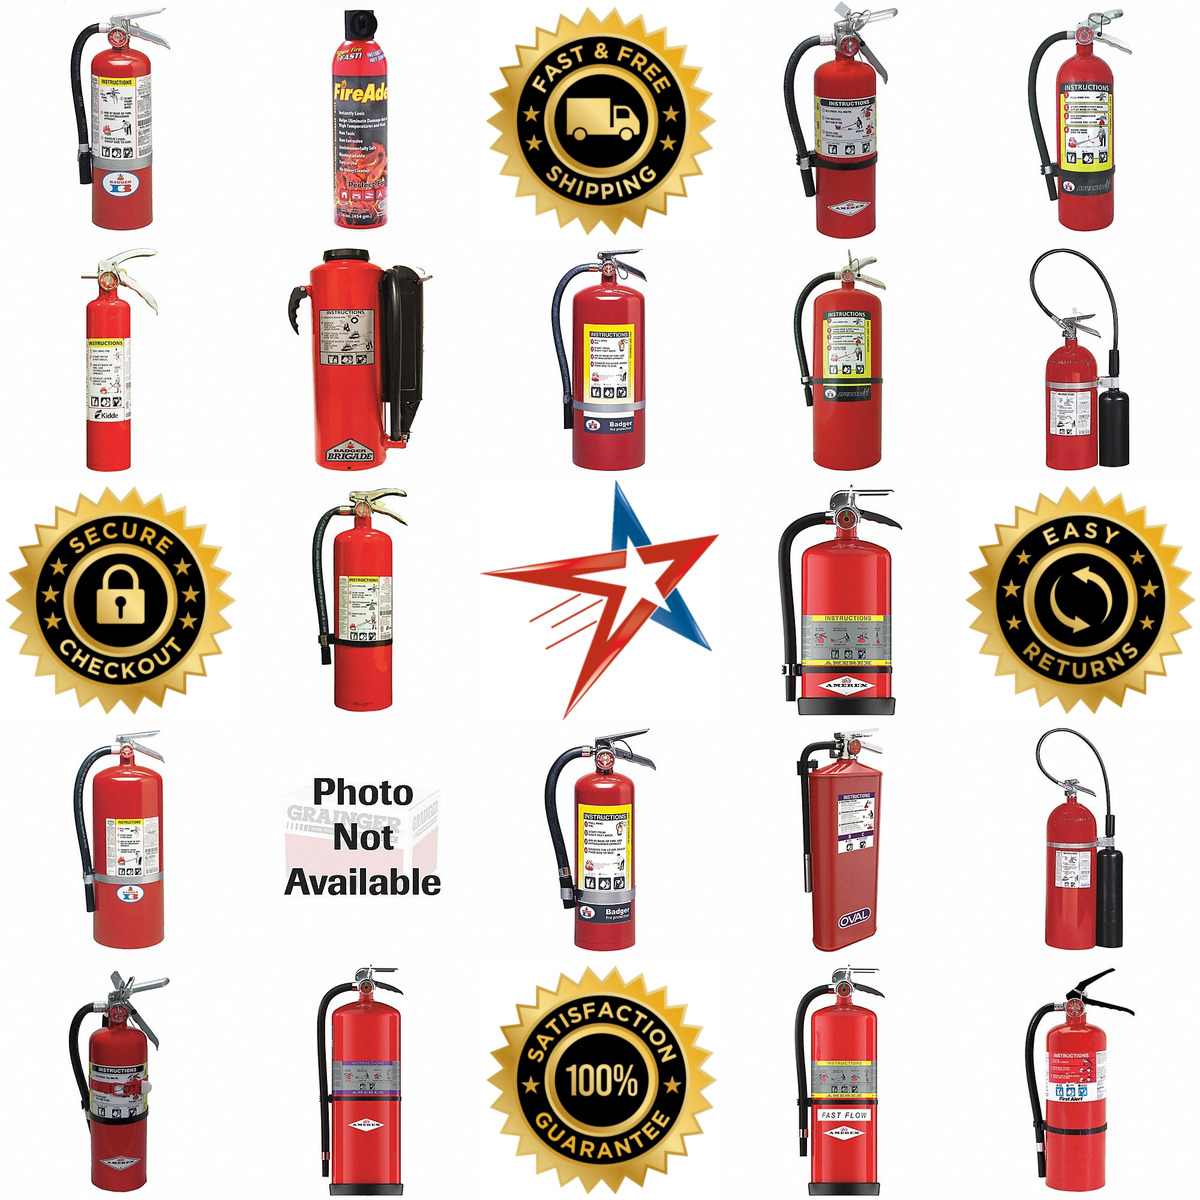 A selection of Fire Extinguishers products on GoVets